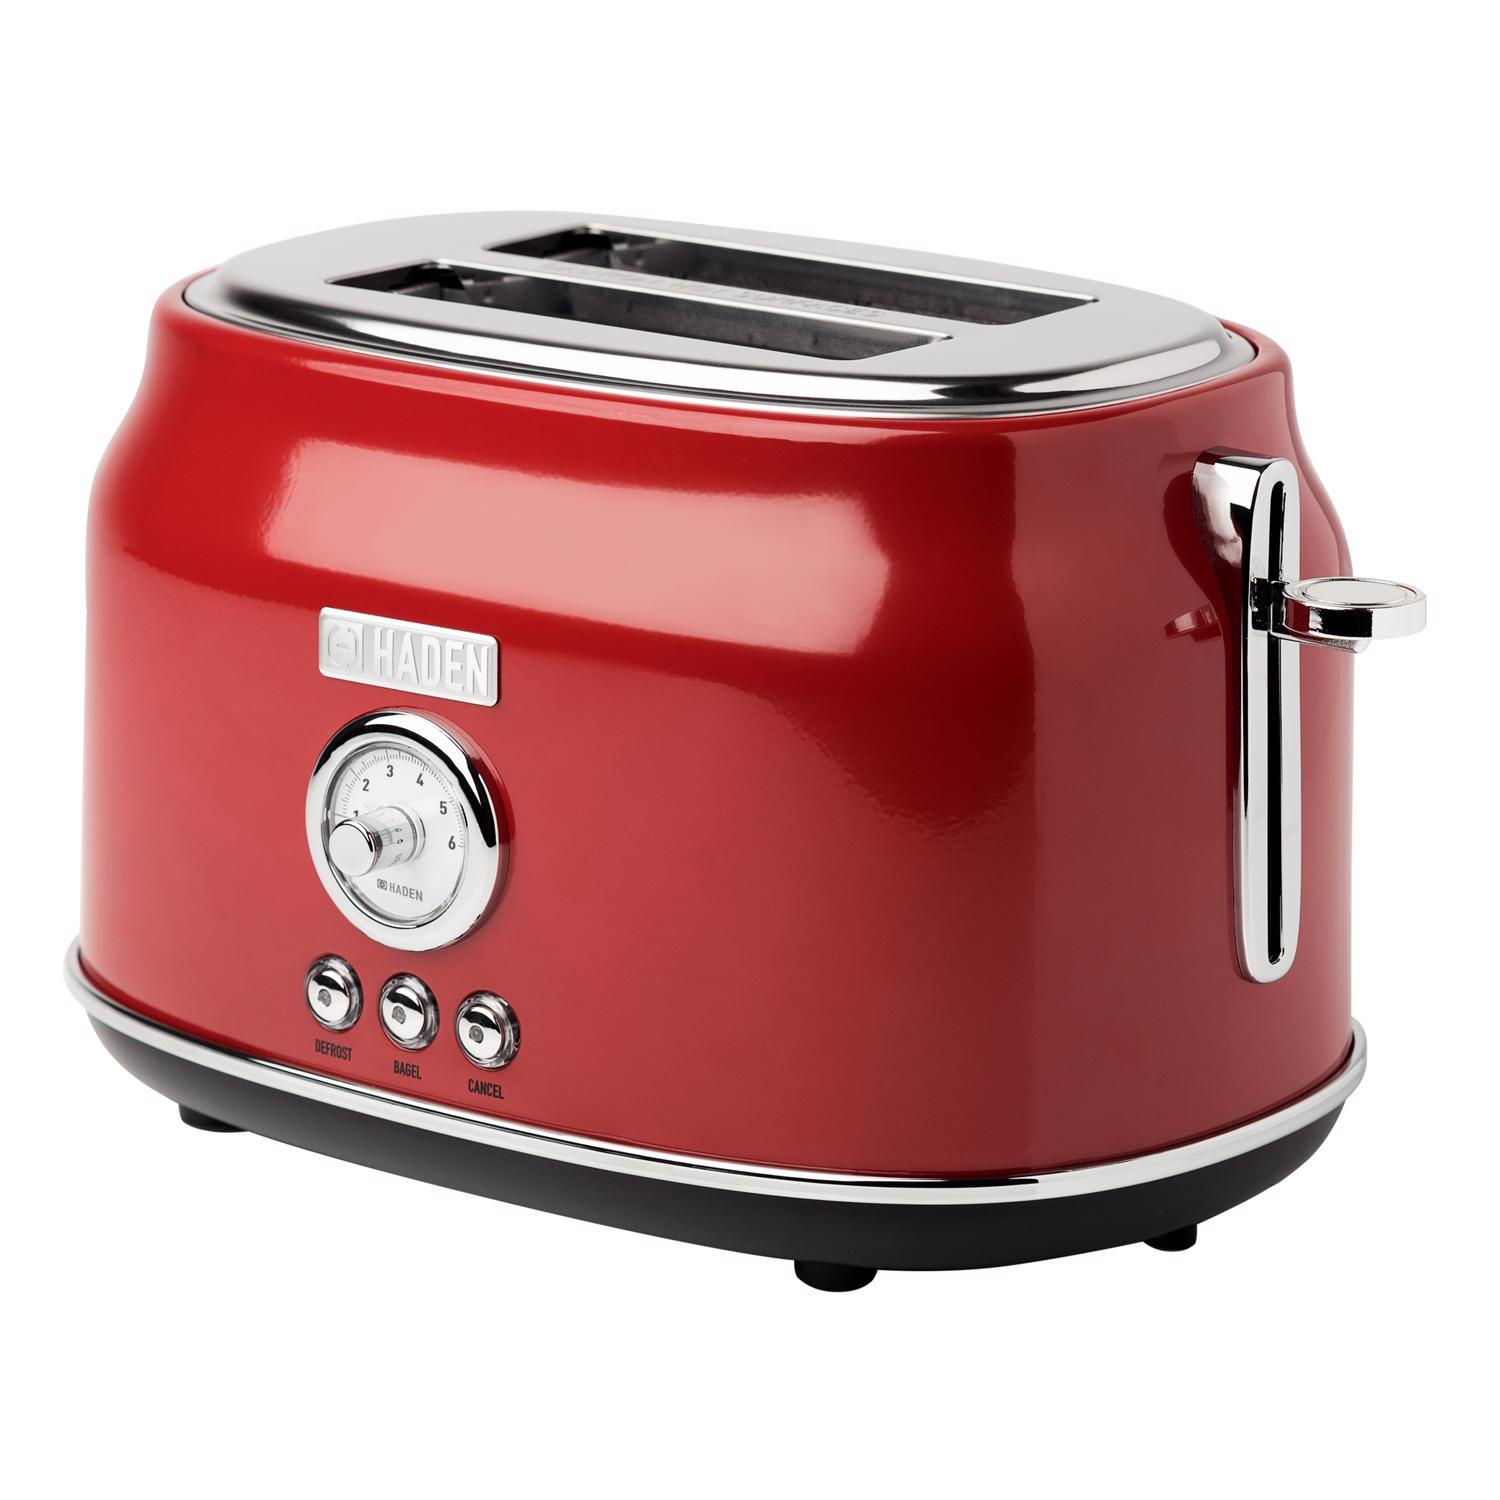 Photos - Toaster Haden Dorset Stainless Steel Red 2 slot  7 in. H X 8 in. W X 13 in. 